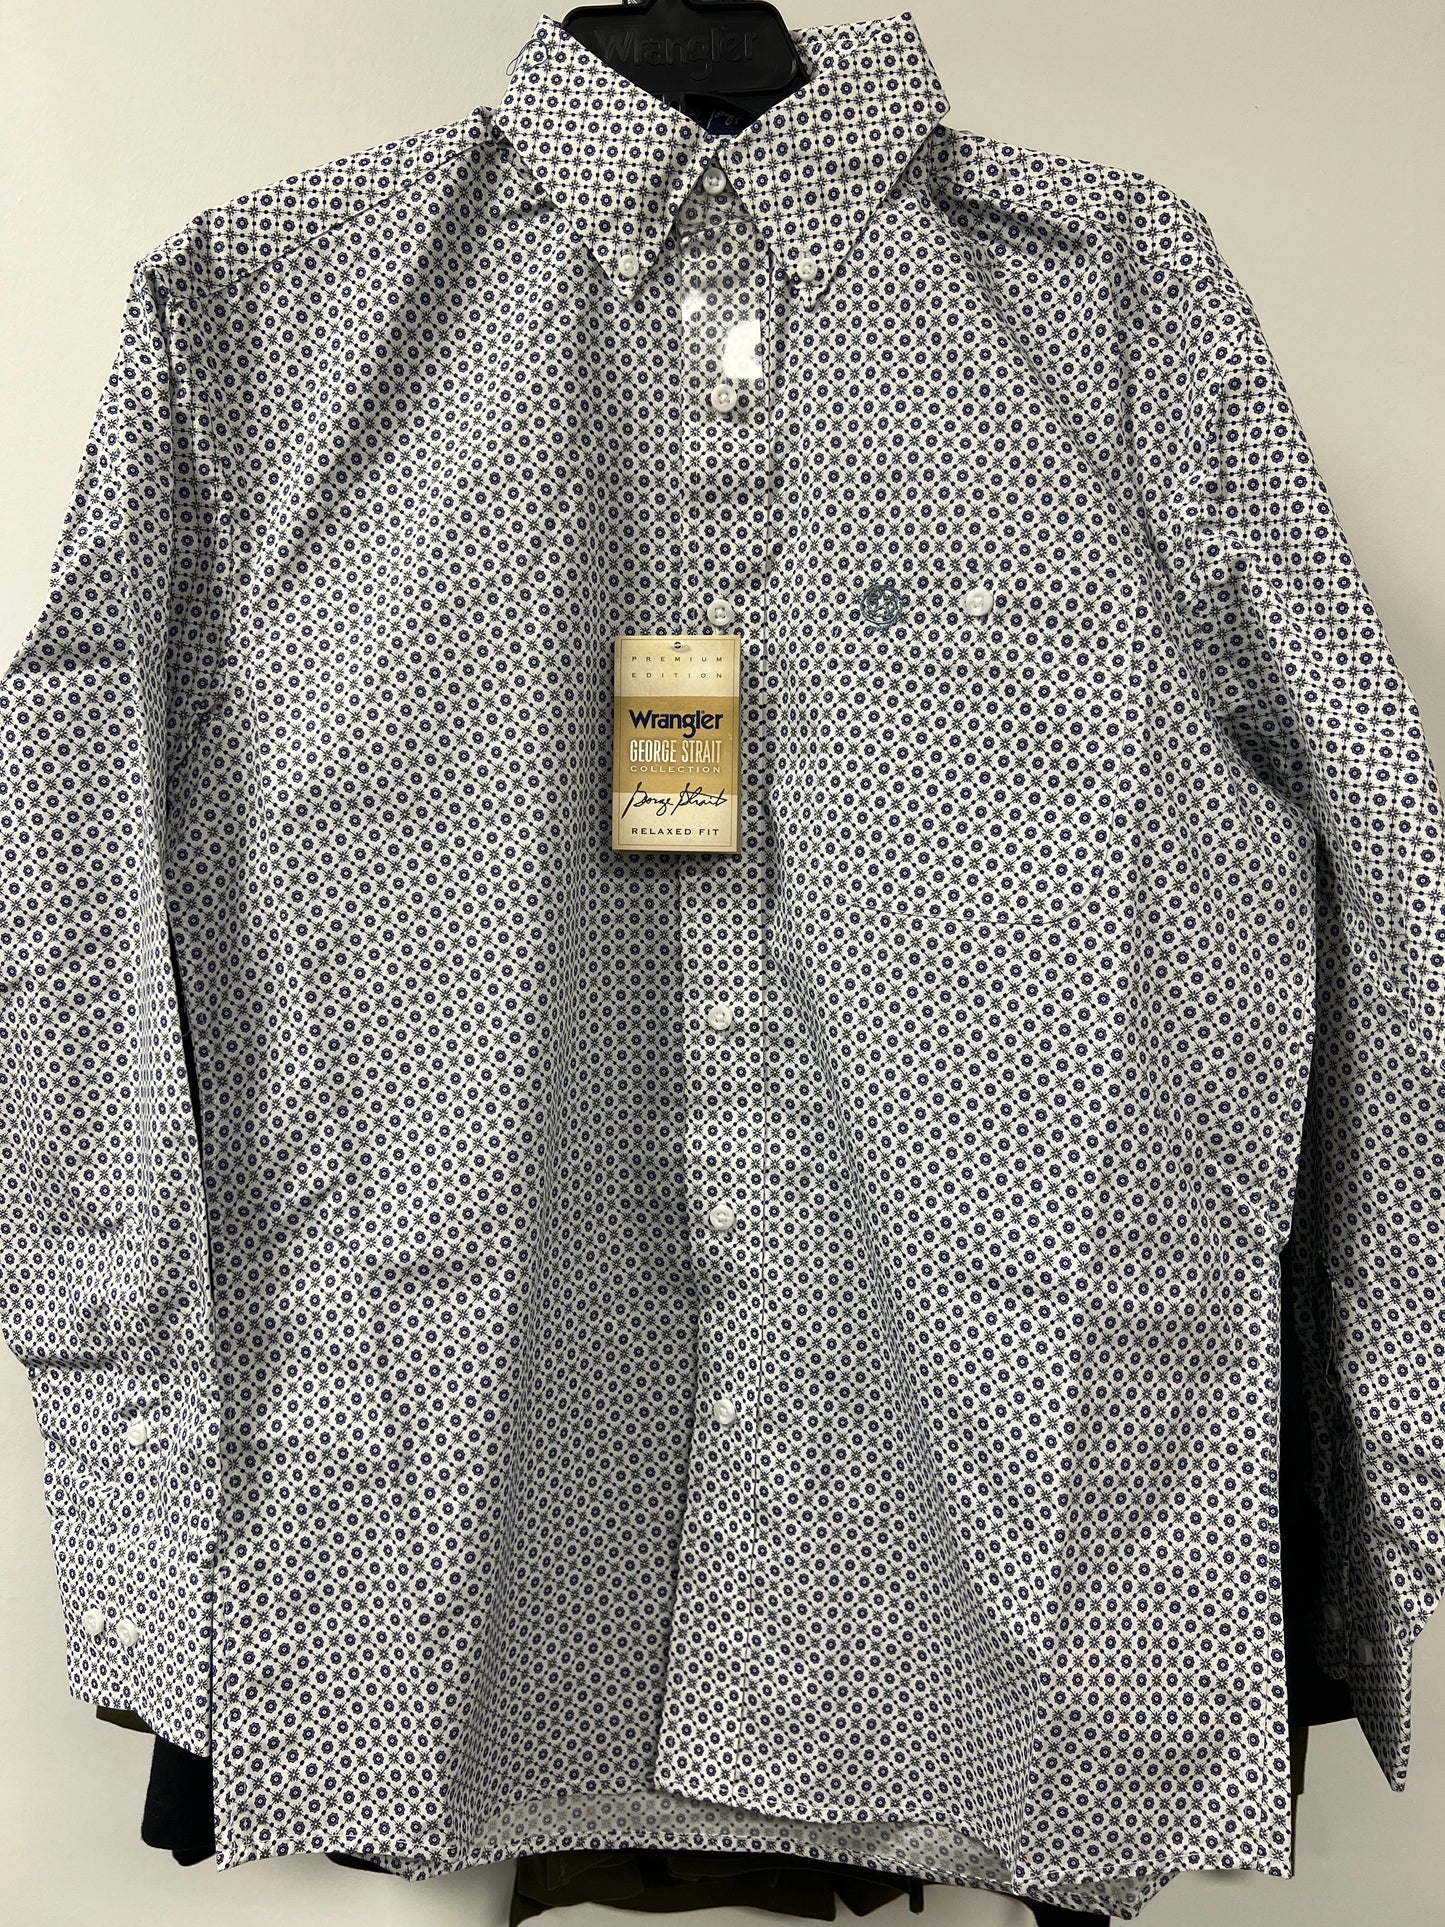 WRANGLER MENS GEORGE STRAIT COLLECTION LONG SLEEVE BUTTON DOWN